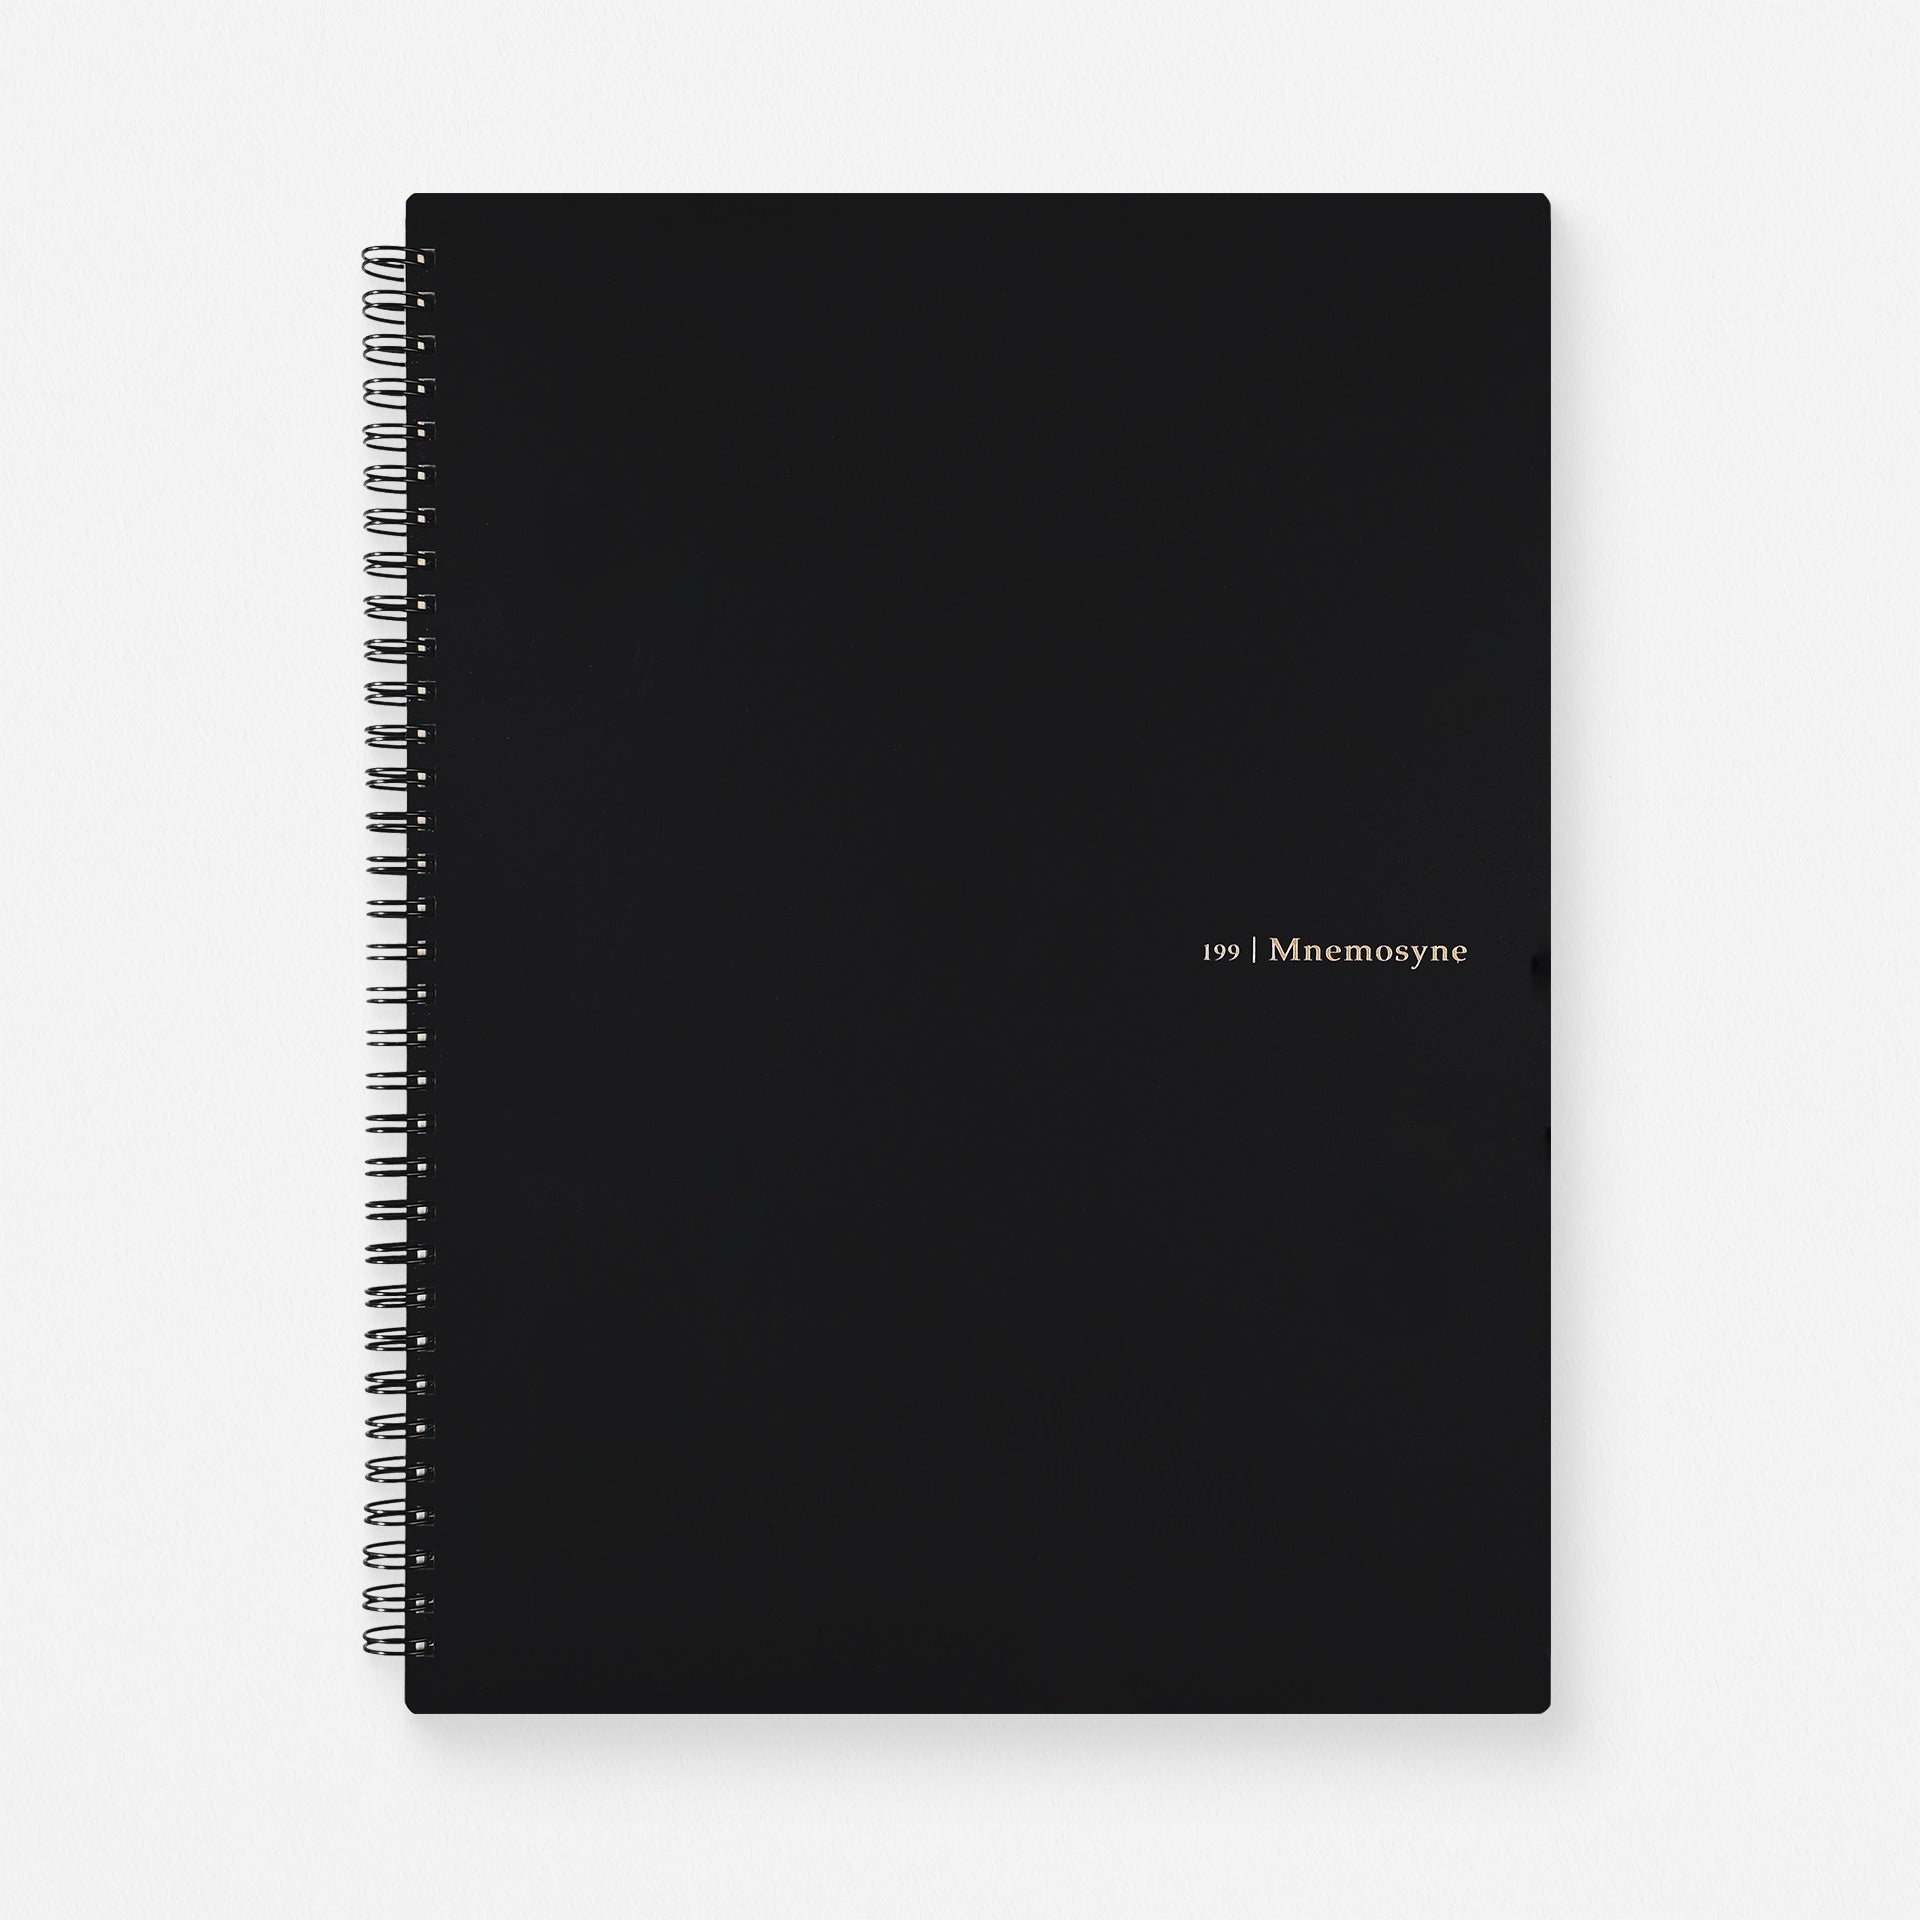 Maruman Mnemosyne 199 A4 Notebook Lined 